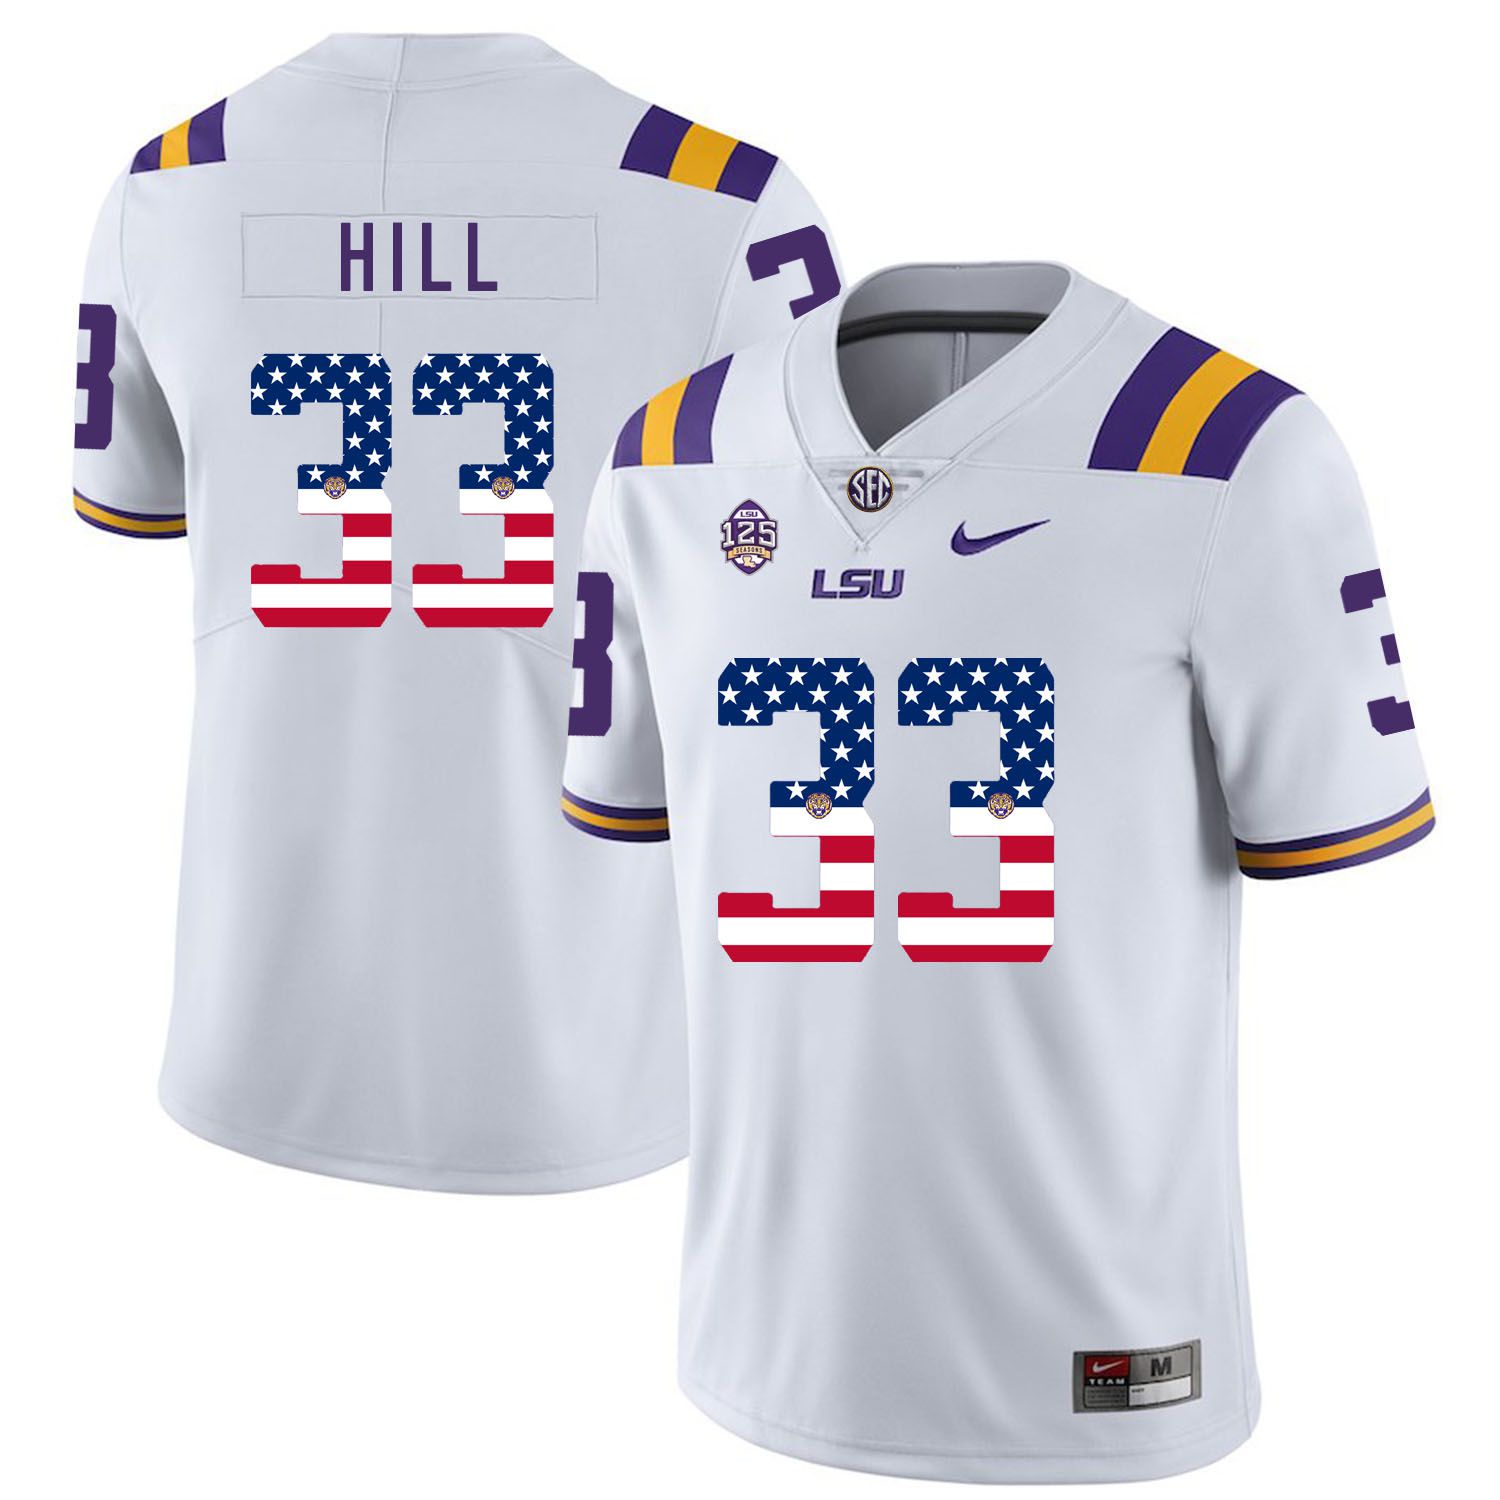 Men LSU Tigers #33 Hill White Flag Customized NCAA Jerseys->customized ncaa jersey->Custom Jersey